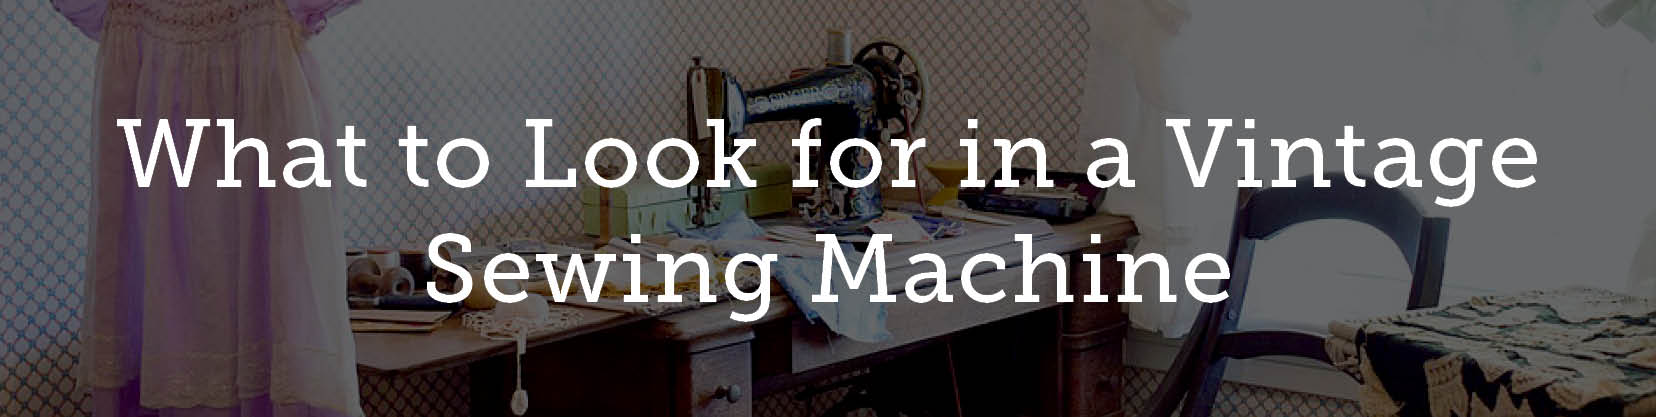 What to look for in a vintage sewing machine